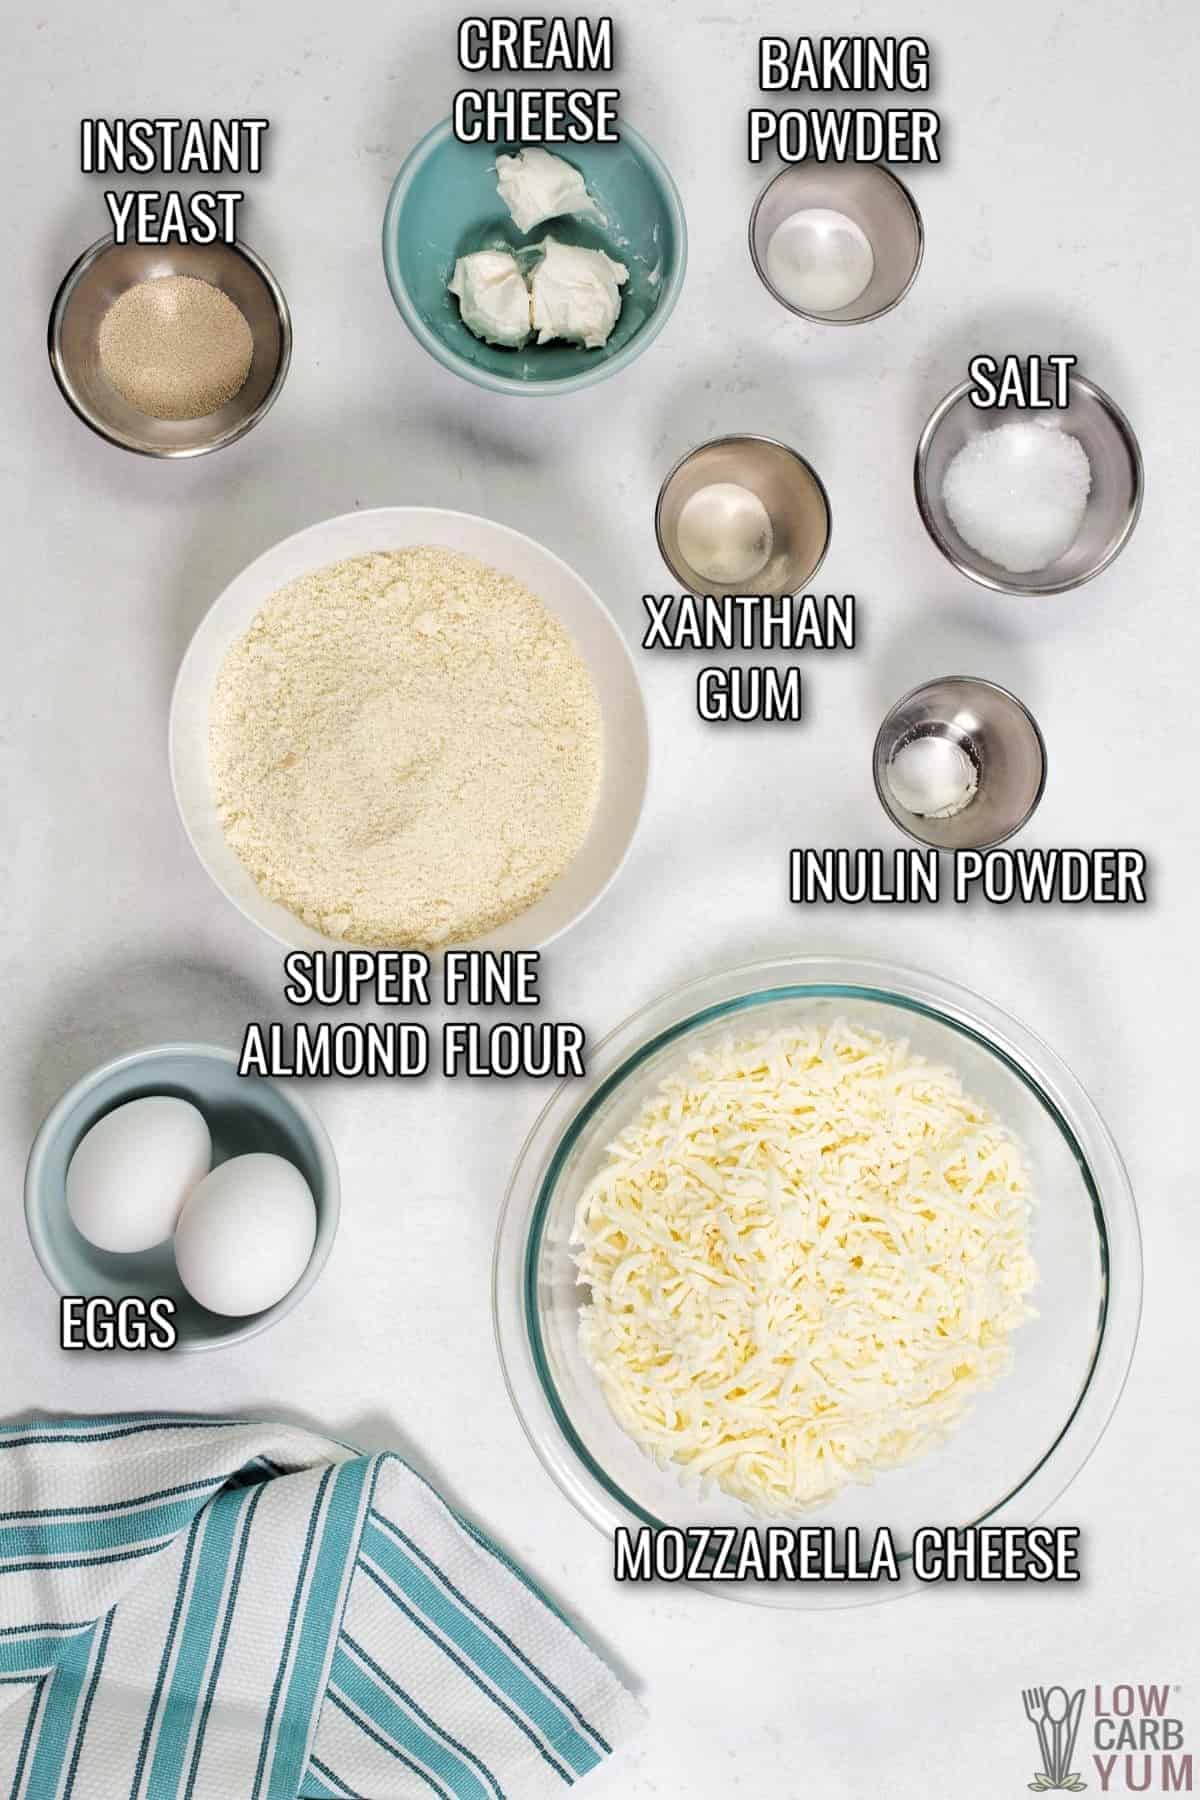 ingredients used in the keto soft pretzels recipe.